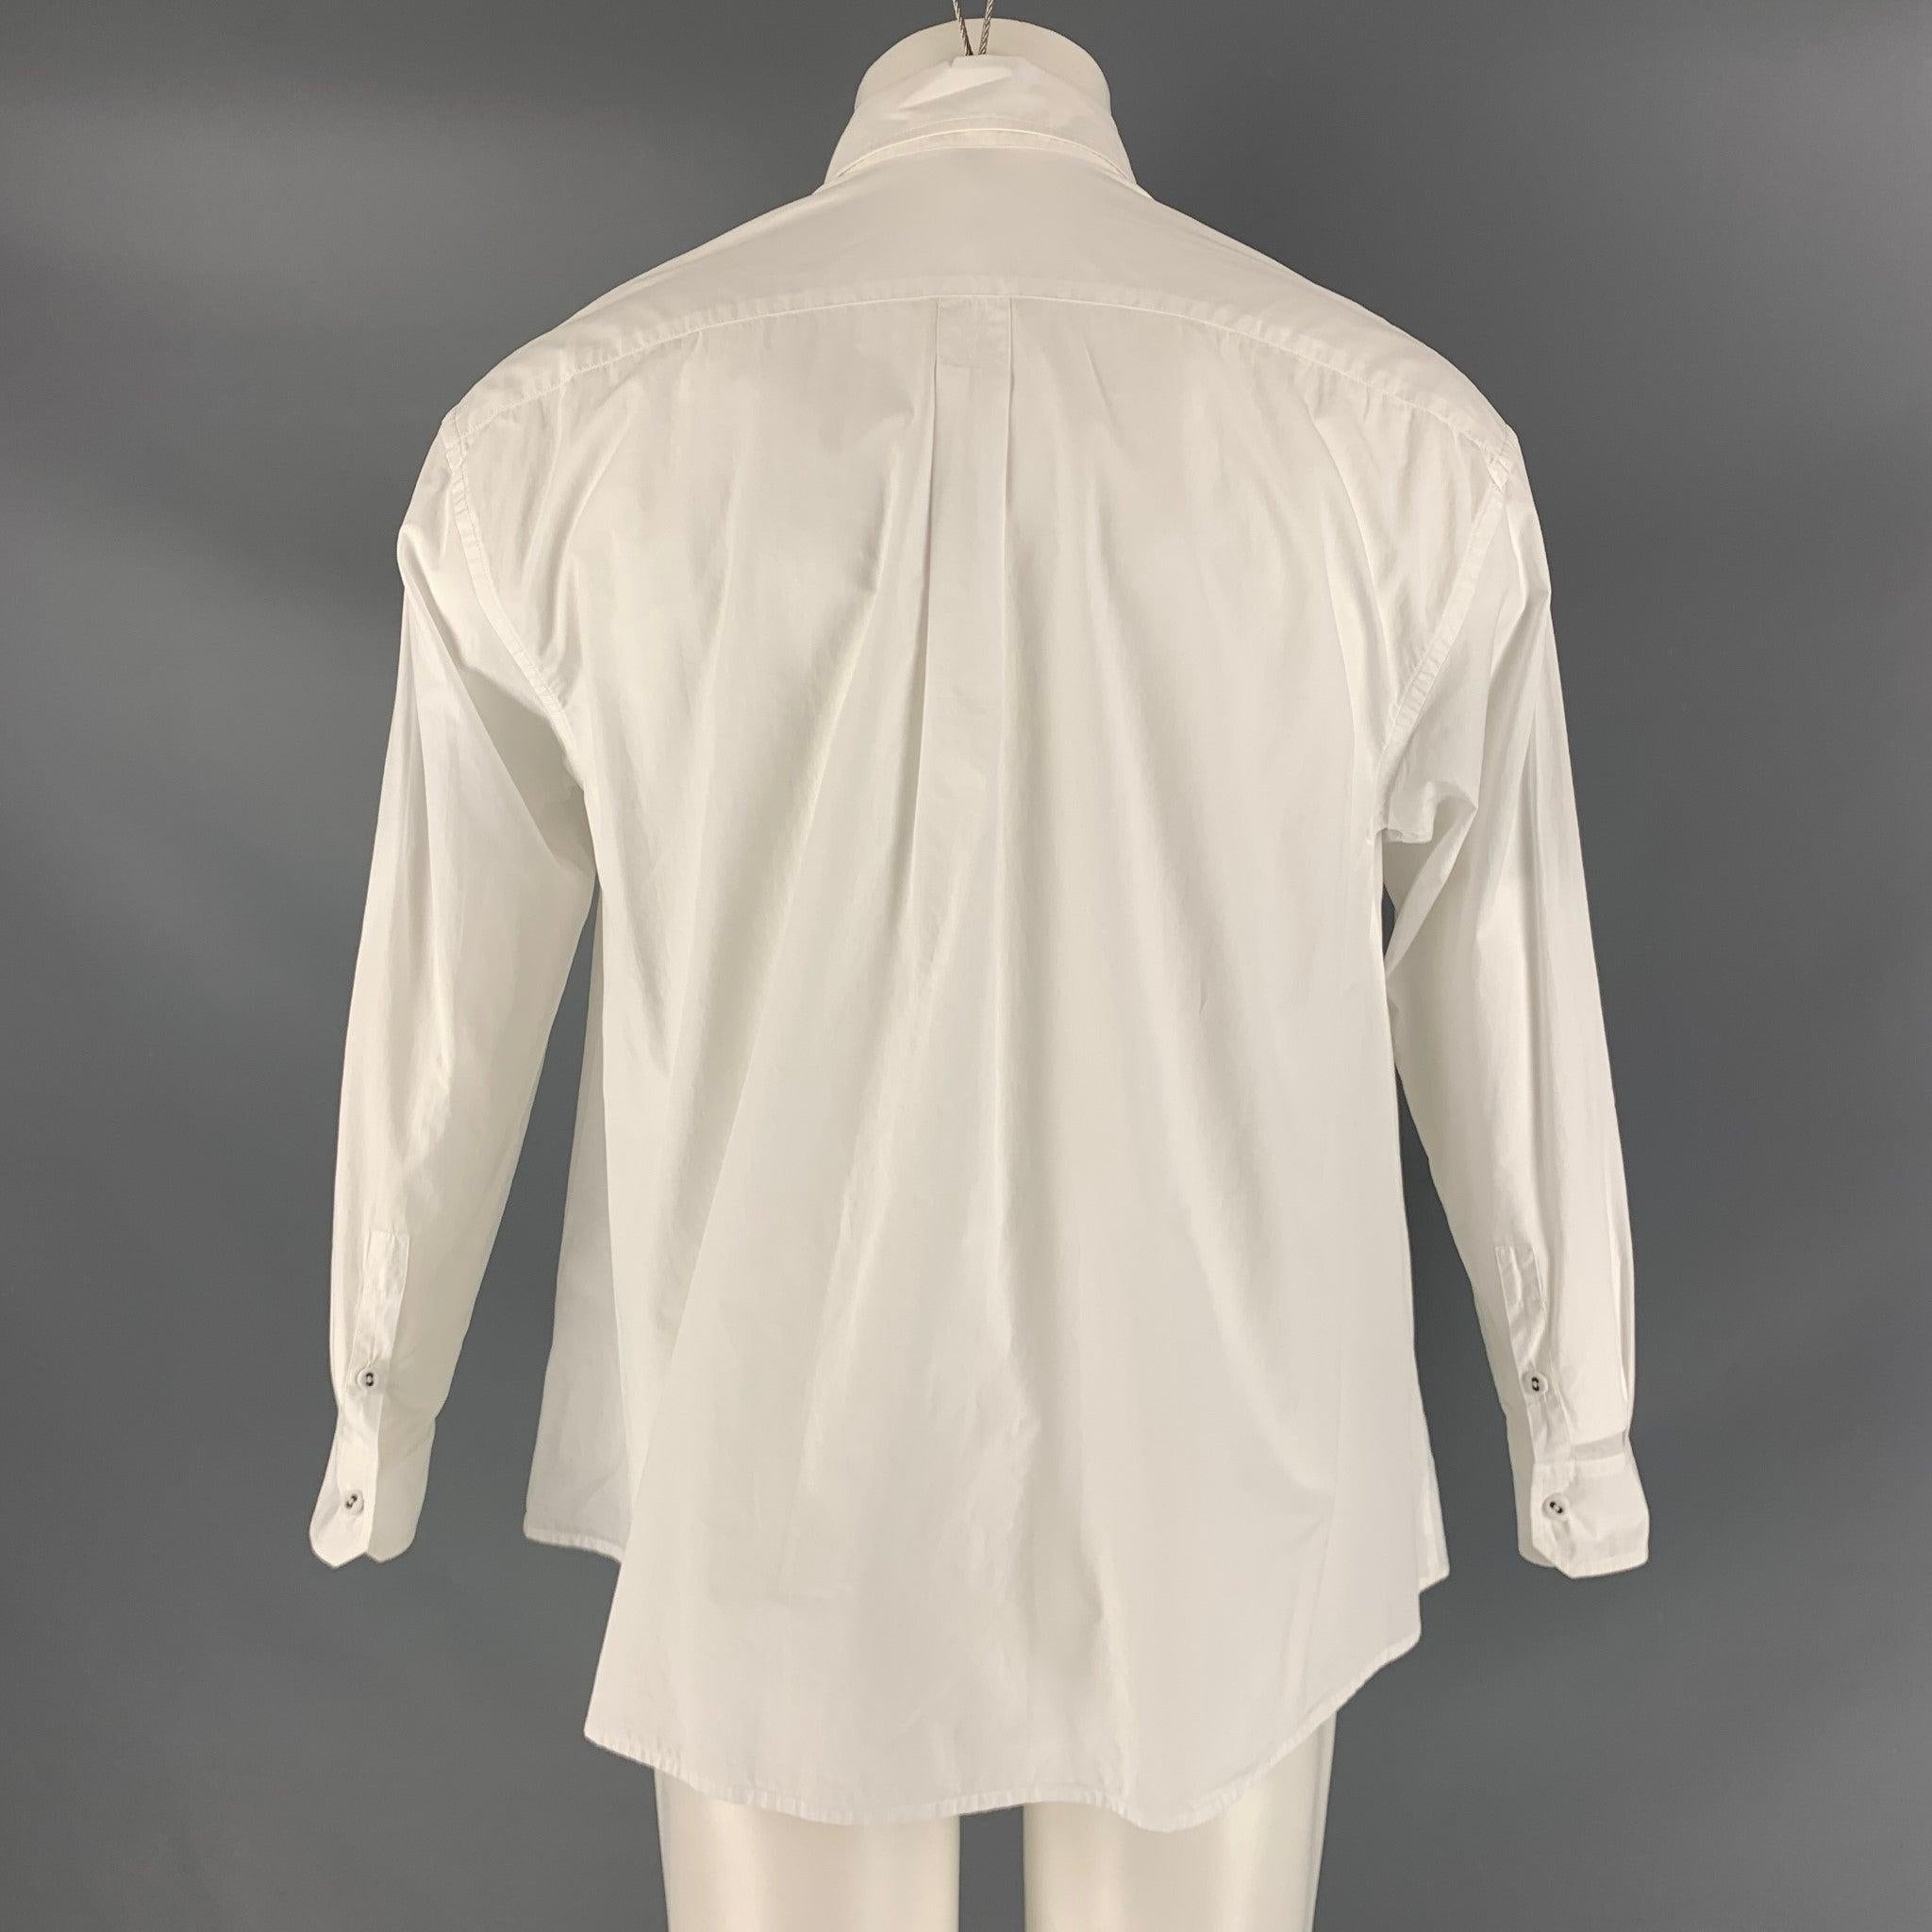 TOMAS MAIER Size M White Solid Cotton Button Up Long Sleeve Shirt In Excellent Condition For Sale In San Francisco, CA